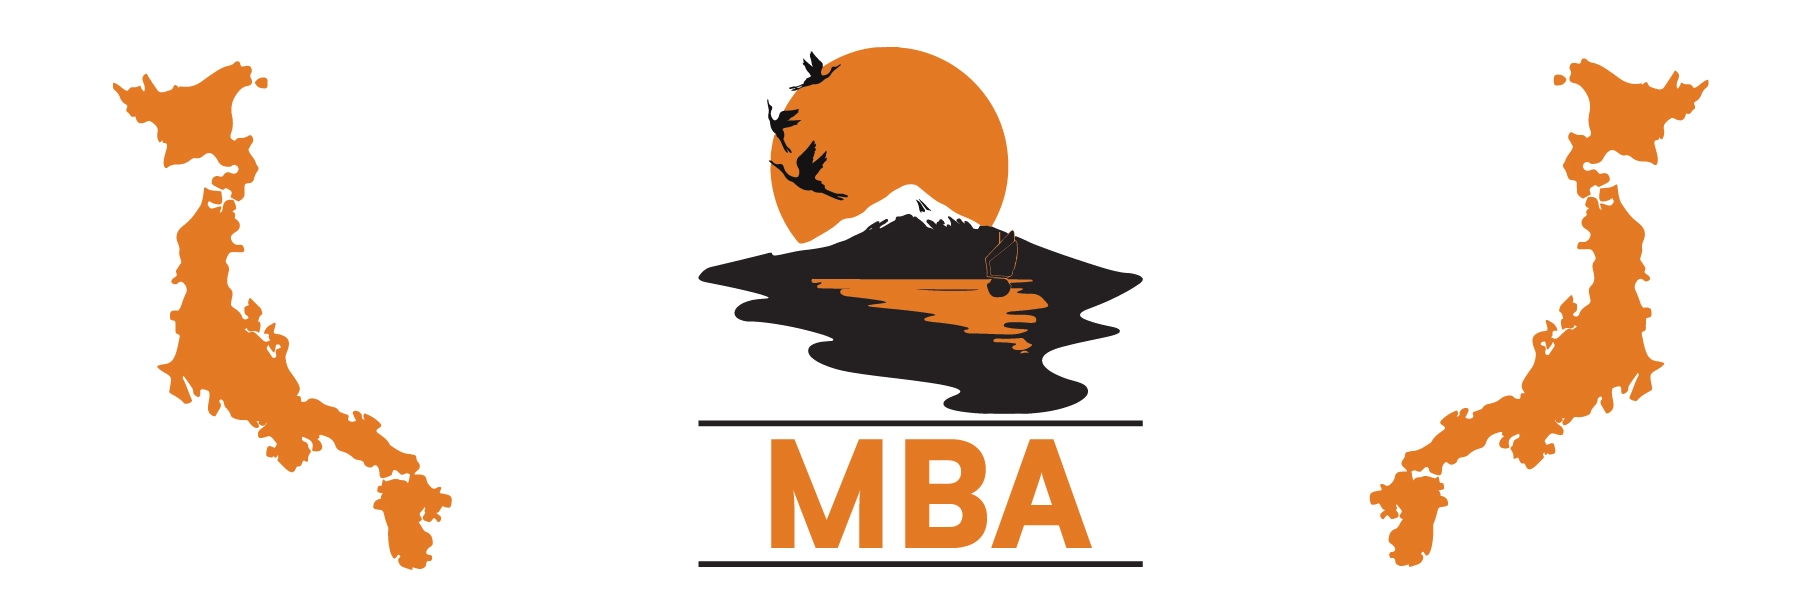 Cost of Studying MBA in Japan: MBA in Japan Cost for Indian Students  Image